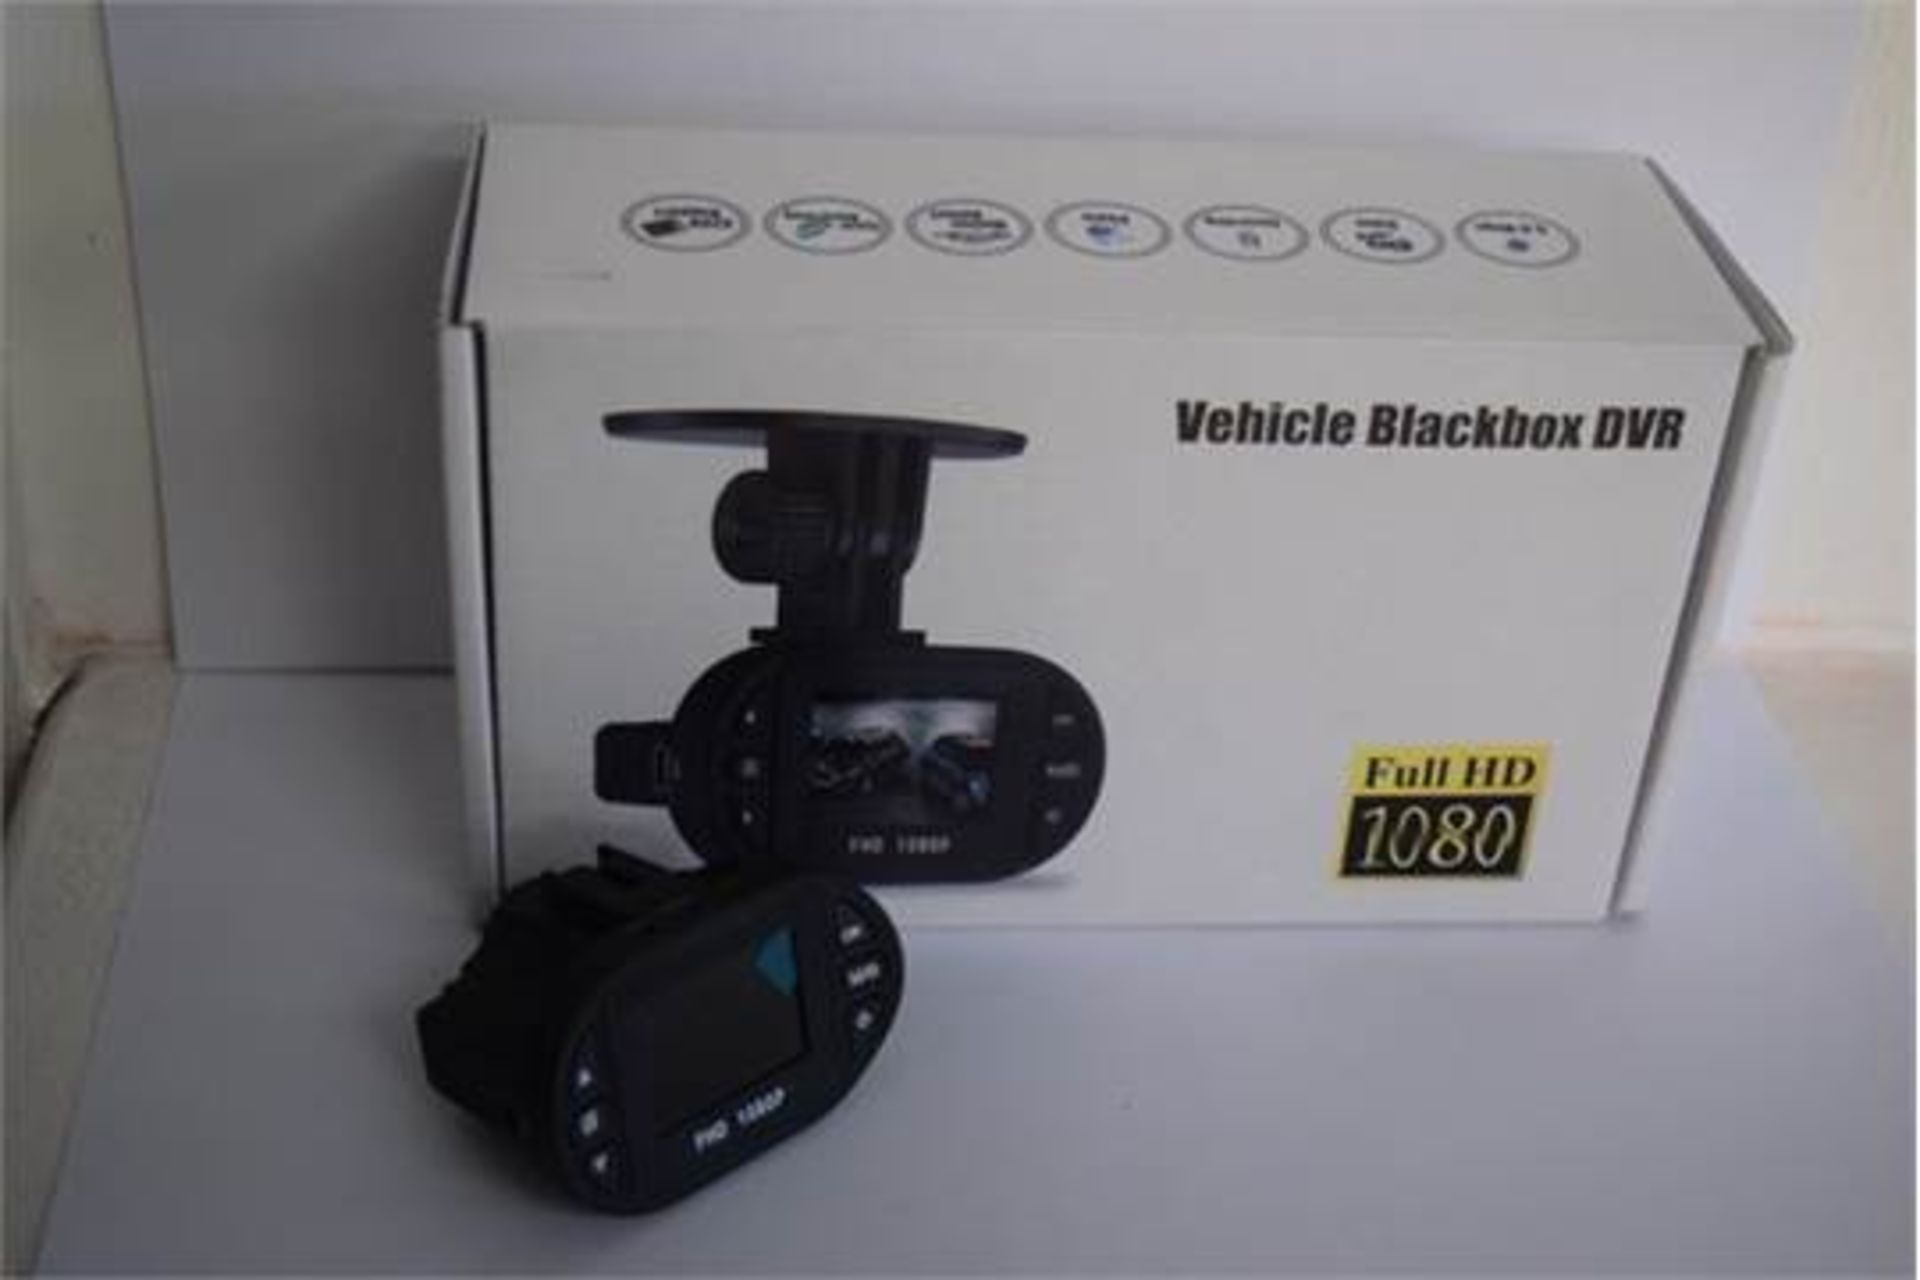 1 x BOXED BRAND NEW VEHICLE BLACK BOX FULL HD 1080 DVR VEHICLE CAMERA C600 WITH WIDE ANGLE LENS